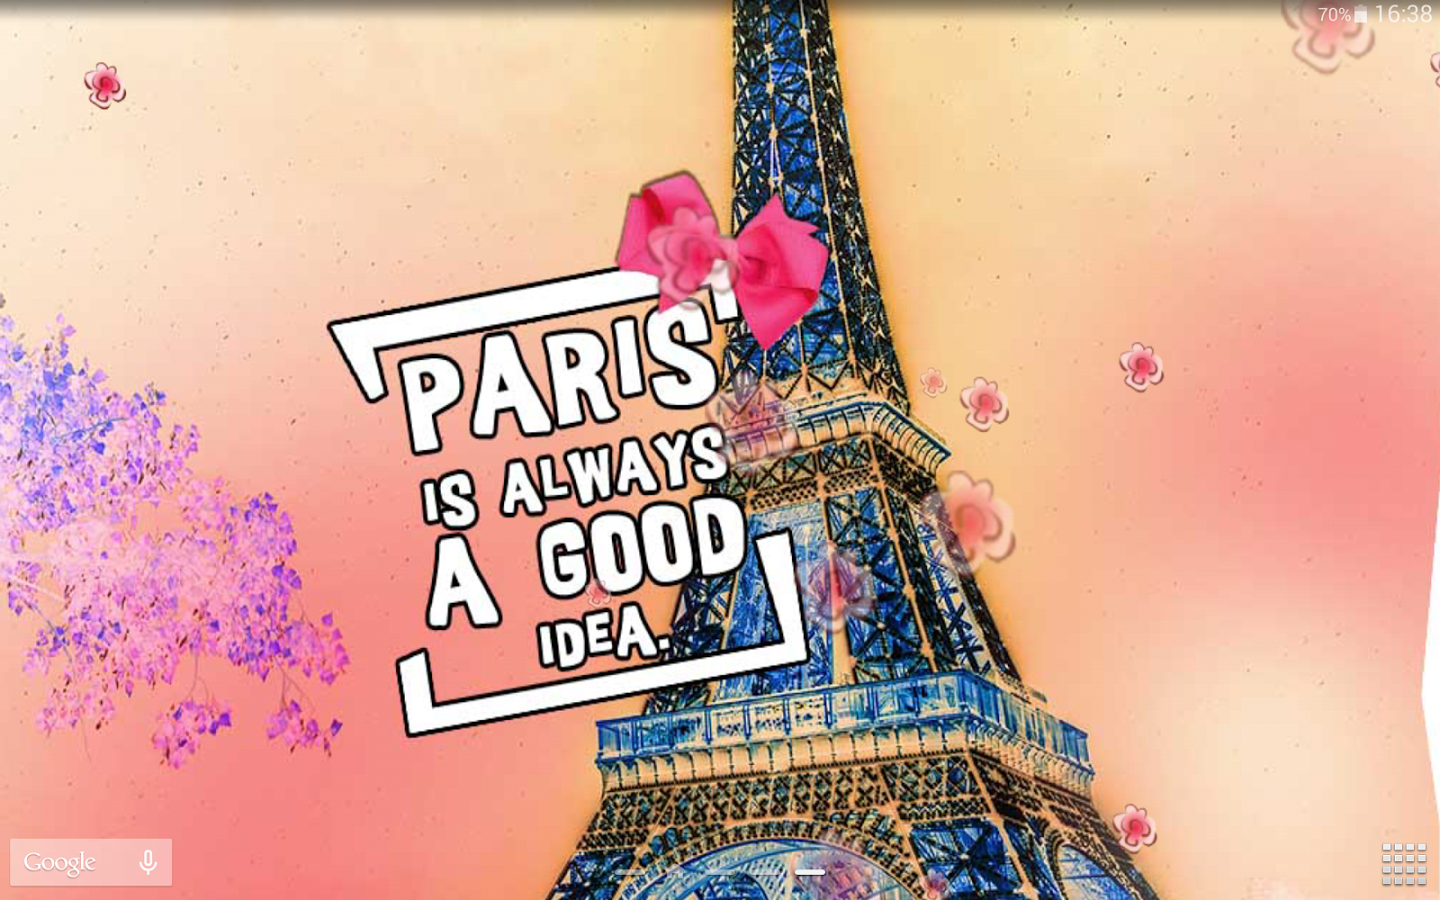 Cute Paris Live Wallpaper   Android Apps on Google Play 1440x900